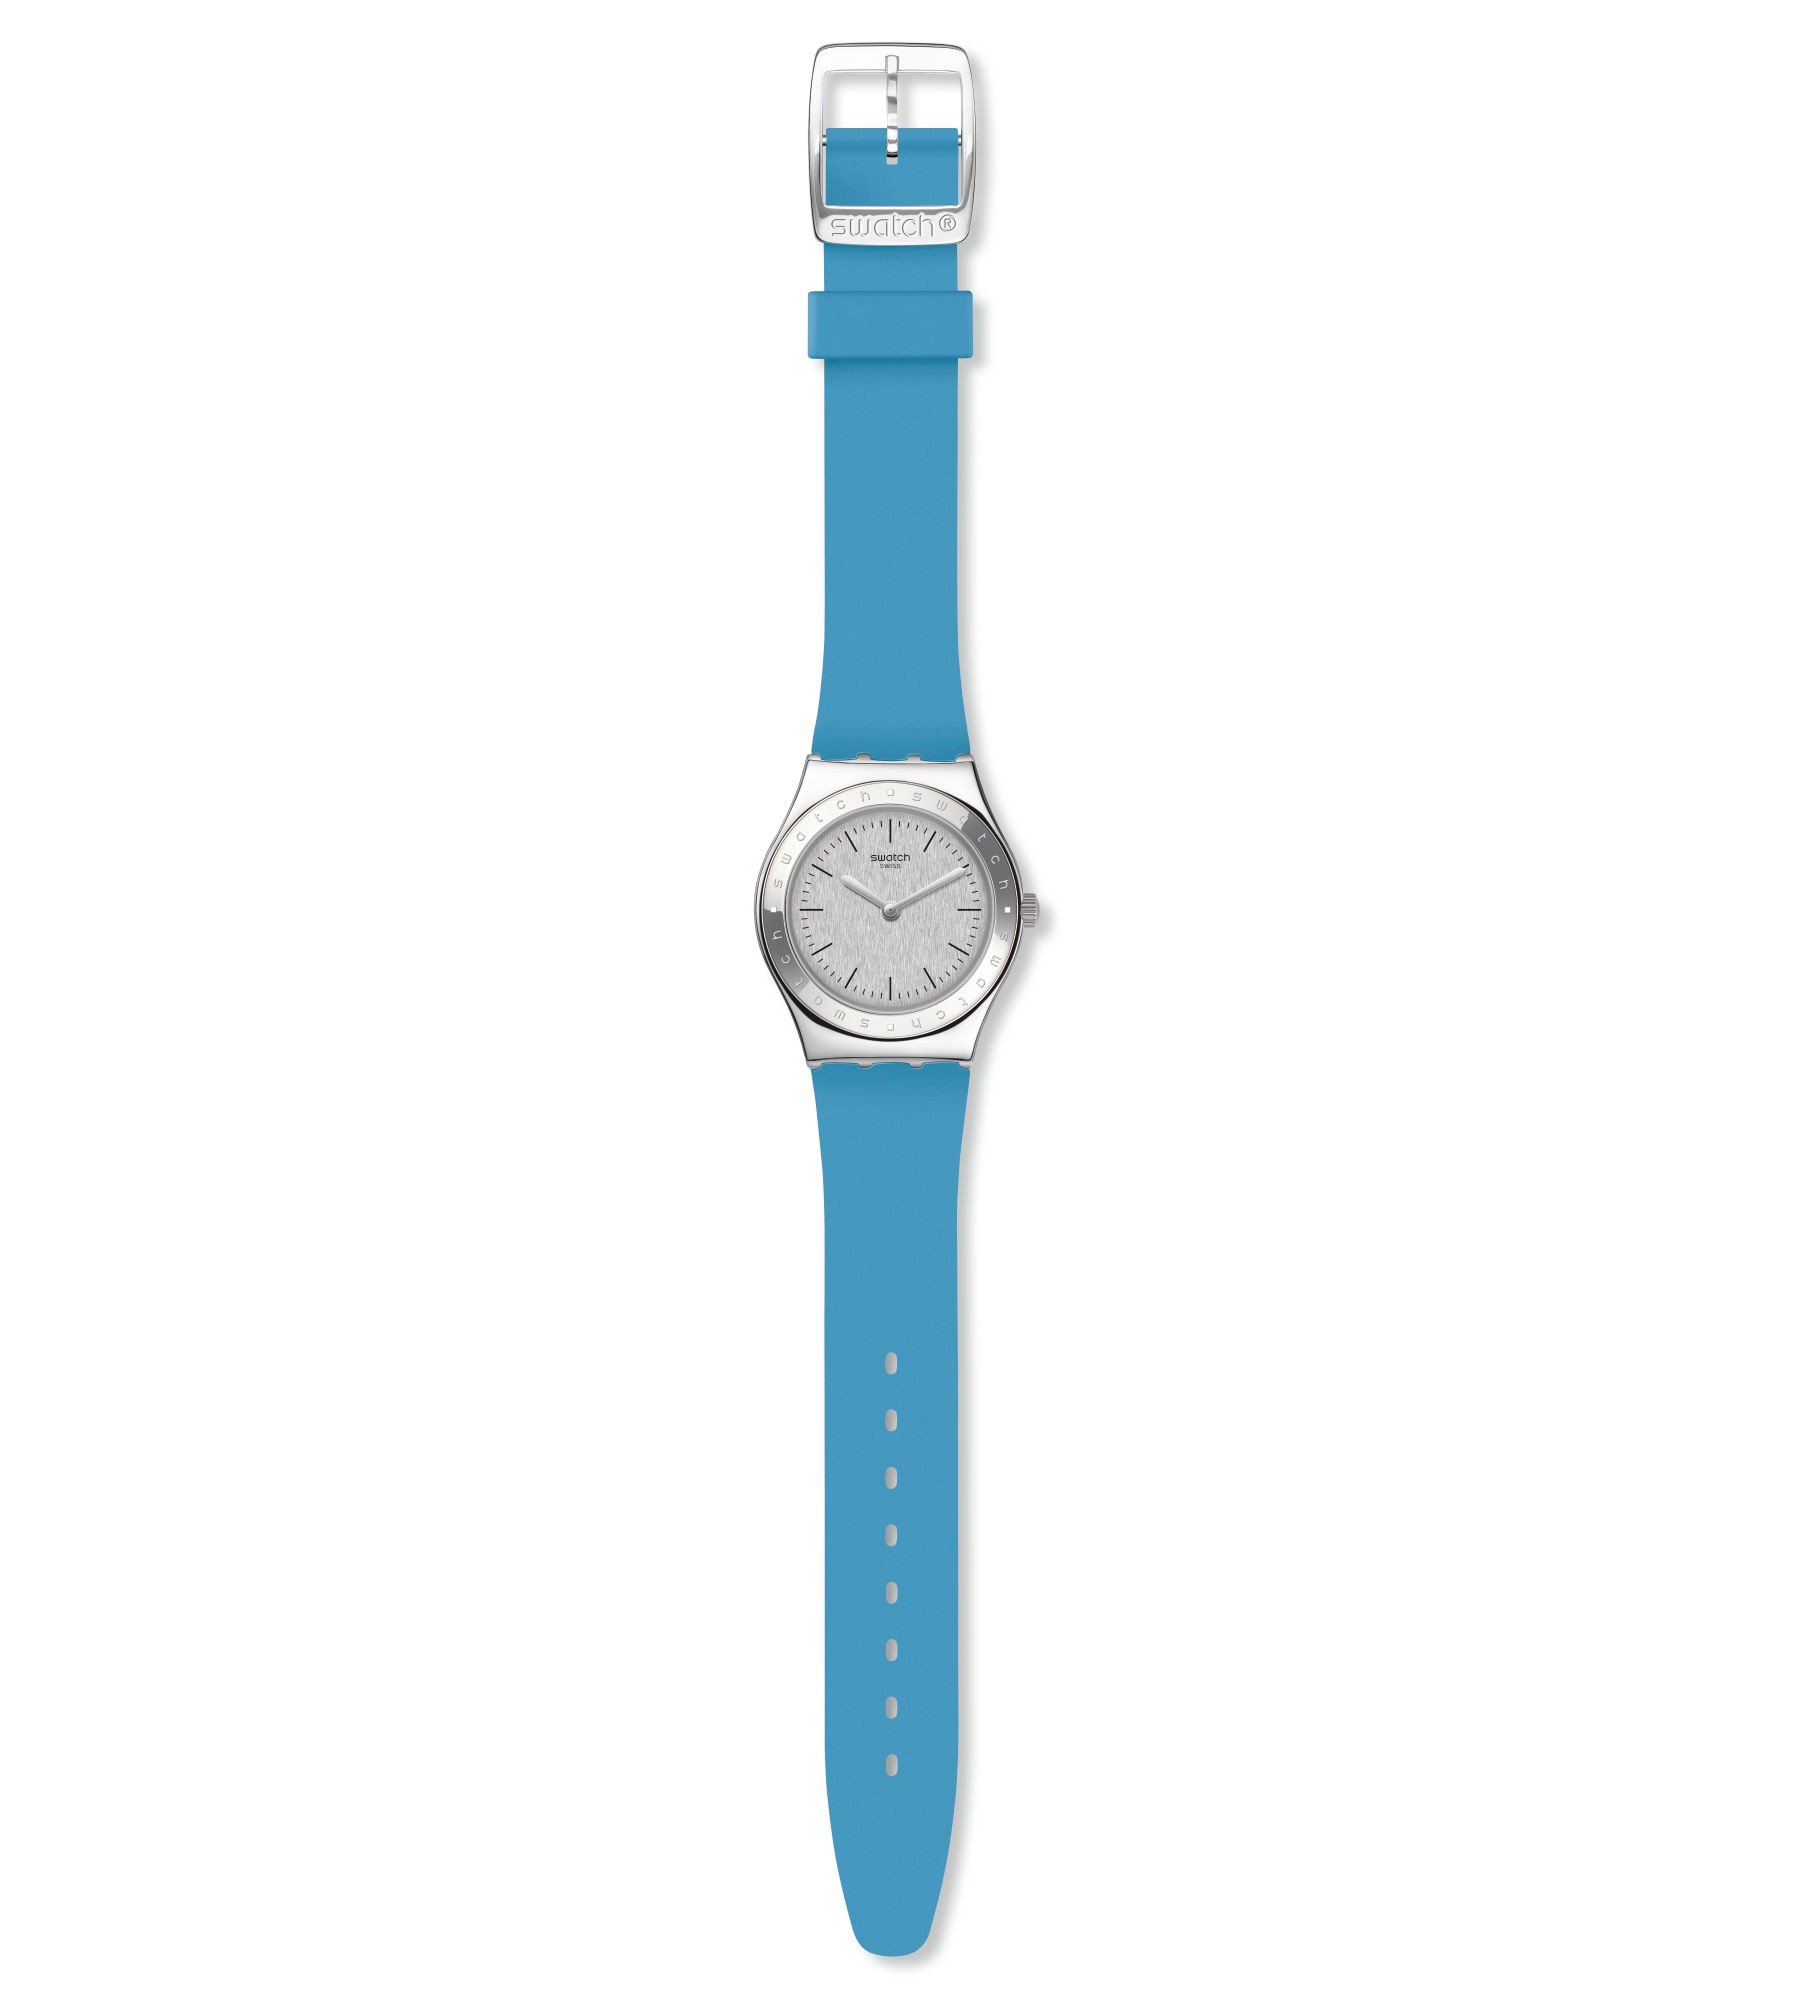 Swatch Women's Stainless Steel Quartz Watch with Silicone Strap, Blue, 18 (Model: YLS203)